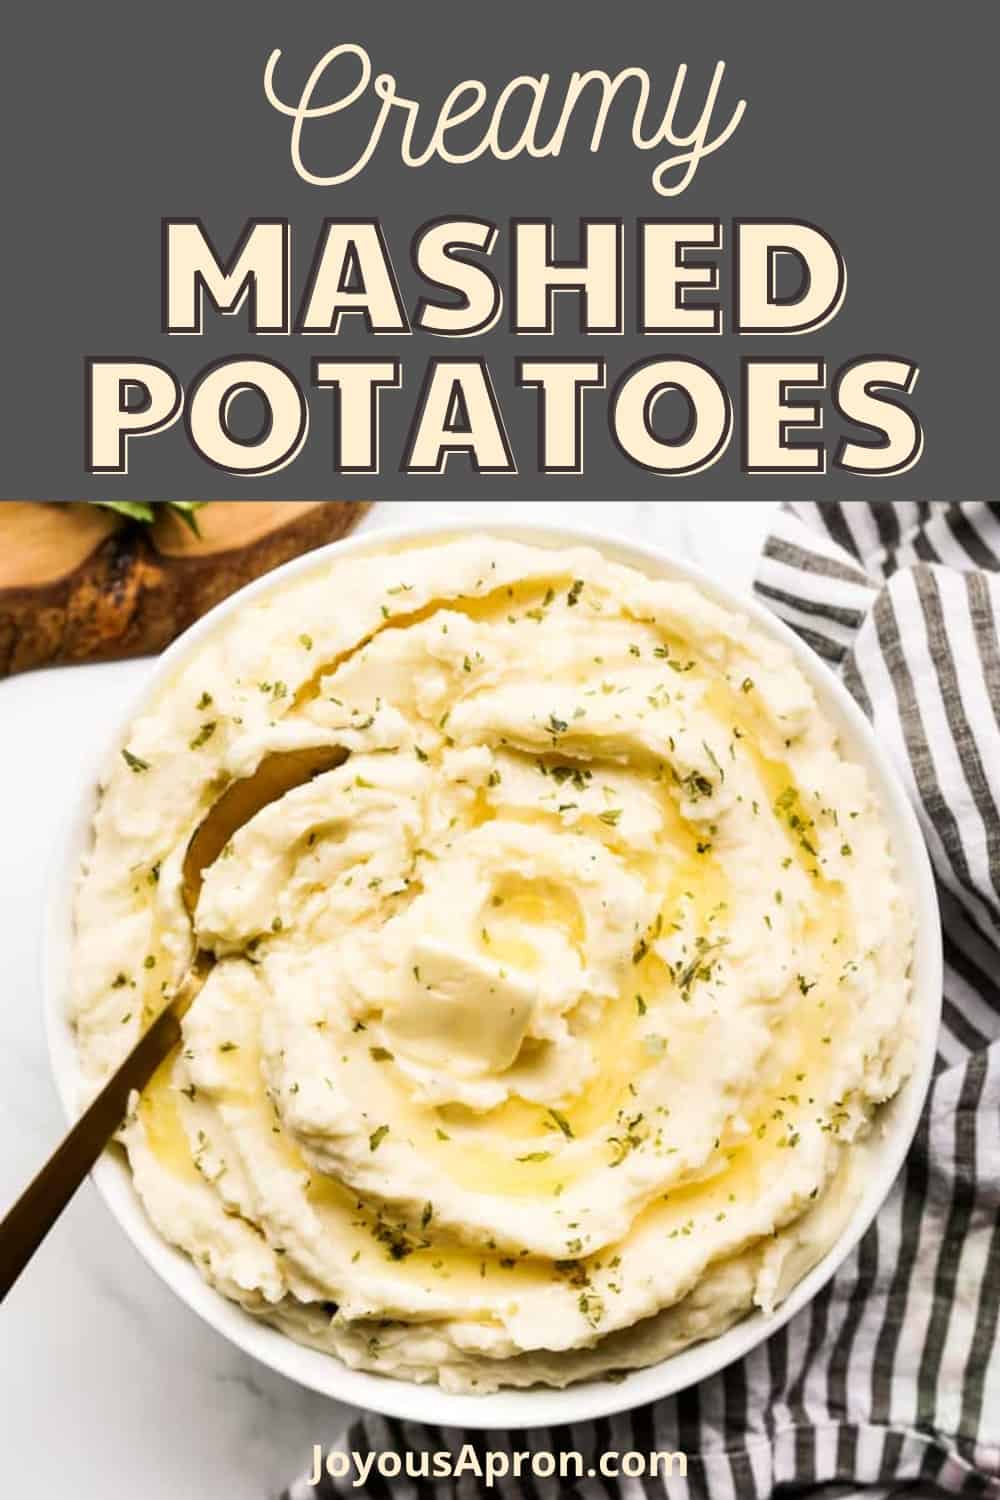 Creamy Mashed Potatoes - fluffy mashed potatoes made with heavy cream, seasoned salt and butter. This luxurious mashed potatoes is incredibly flavorful. The perfect side dish for Thanksgiving, Christmas and Easter holidays as well. via @joyousapron